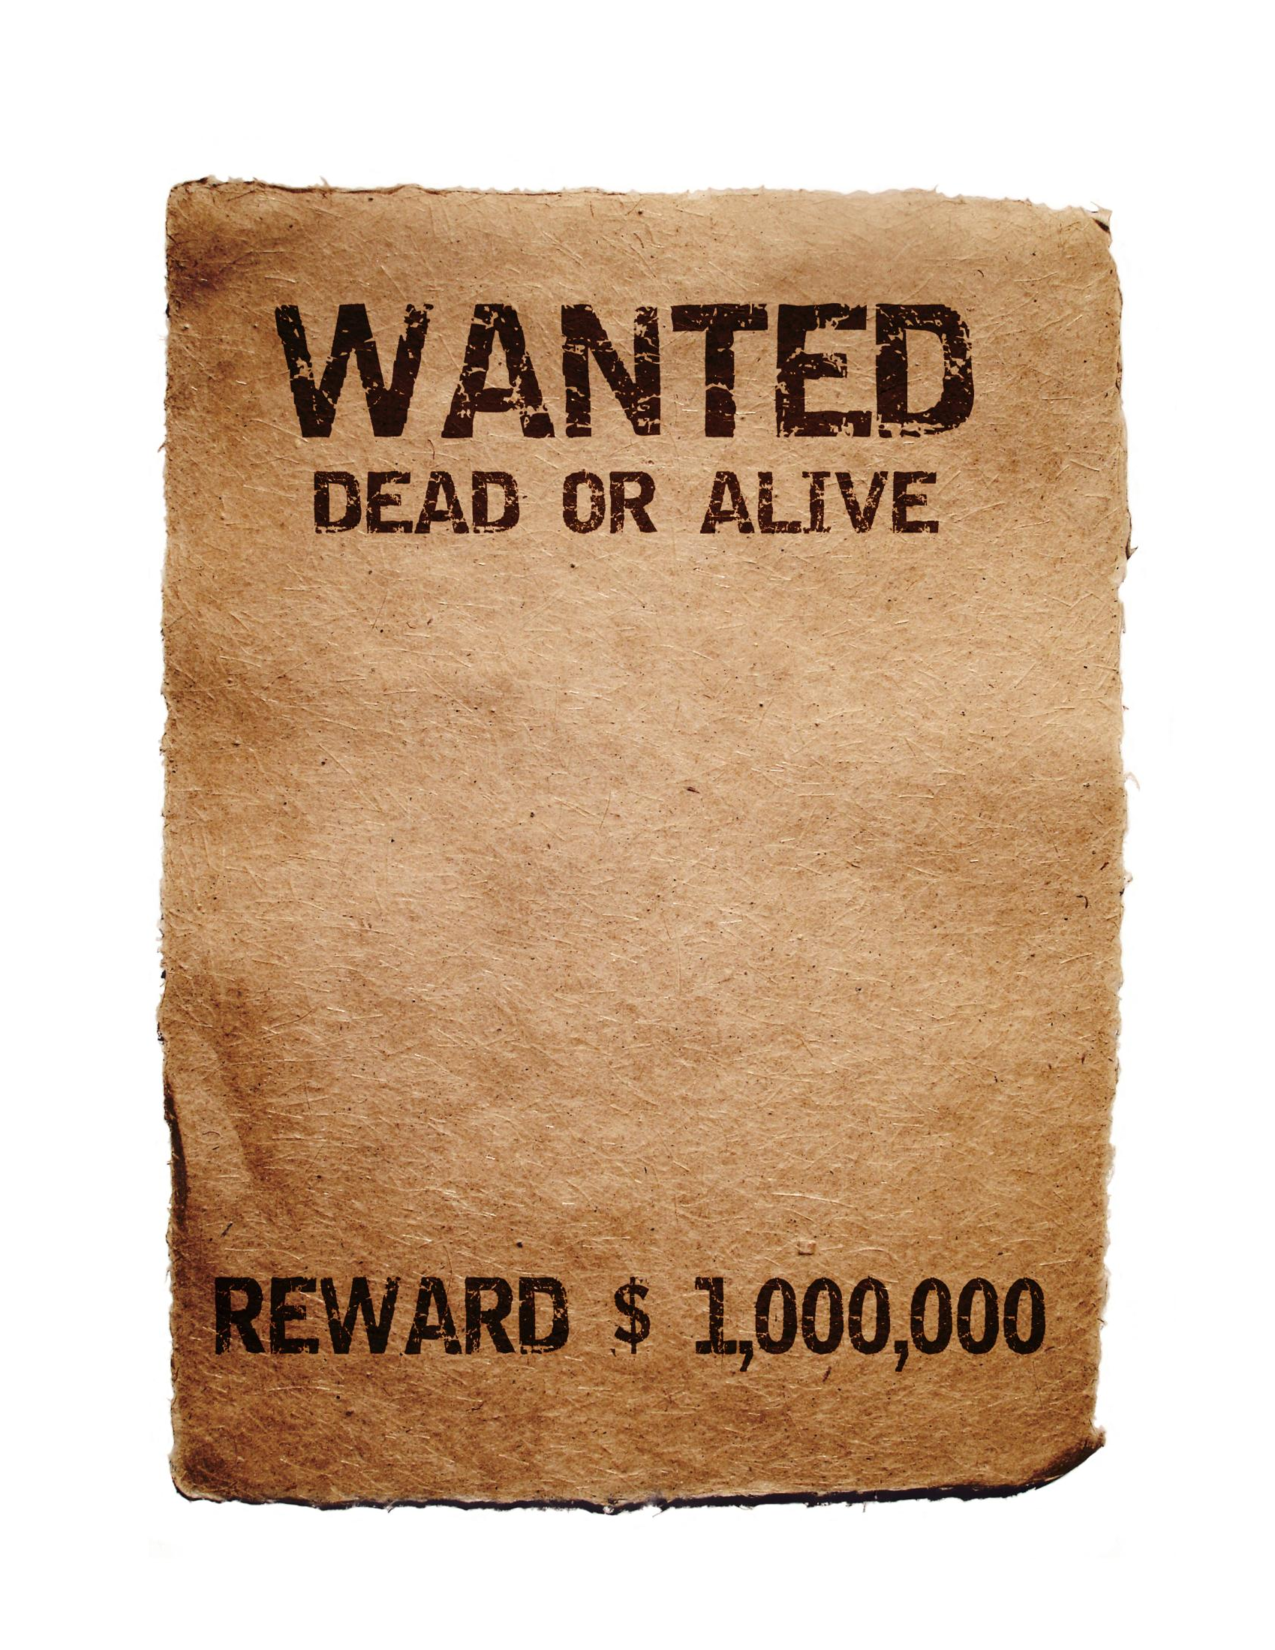 8-best-images-of-blank-wanted-posters-printable-white-wanted-poster-template-blank-most